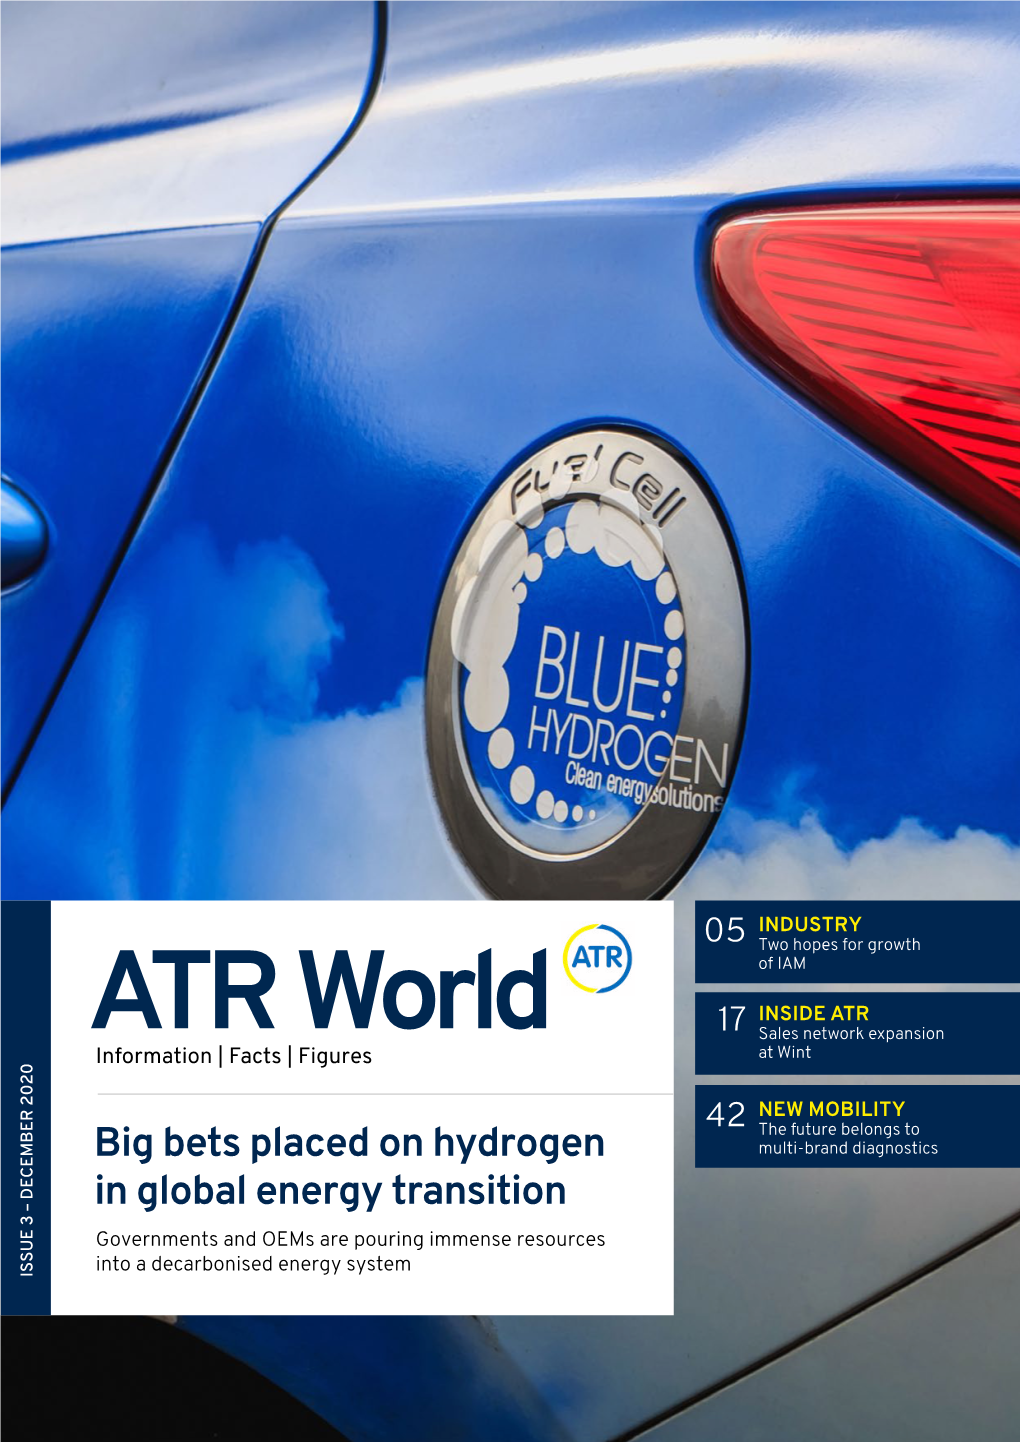 ATR World Sales Network Expansion Information | Facts | Figures at Wint